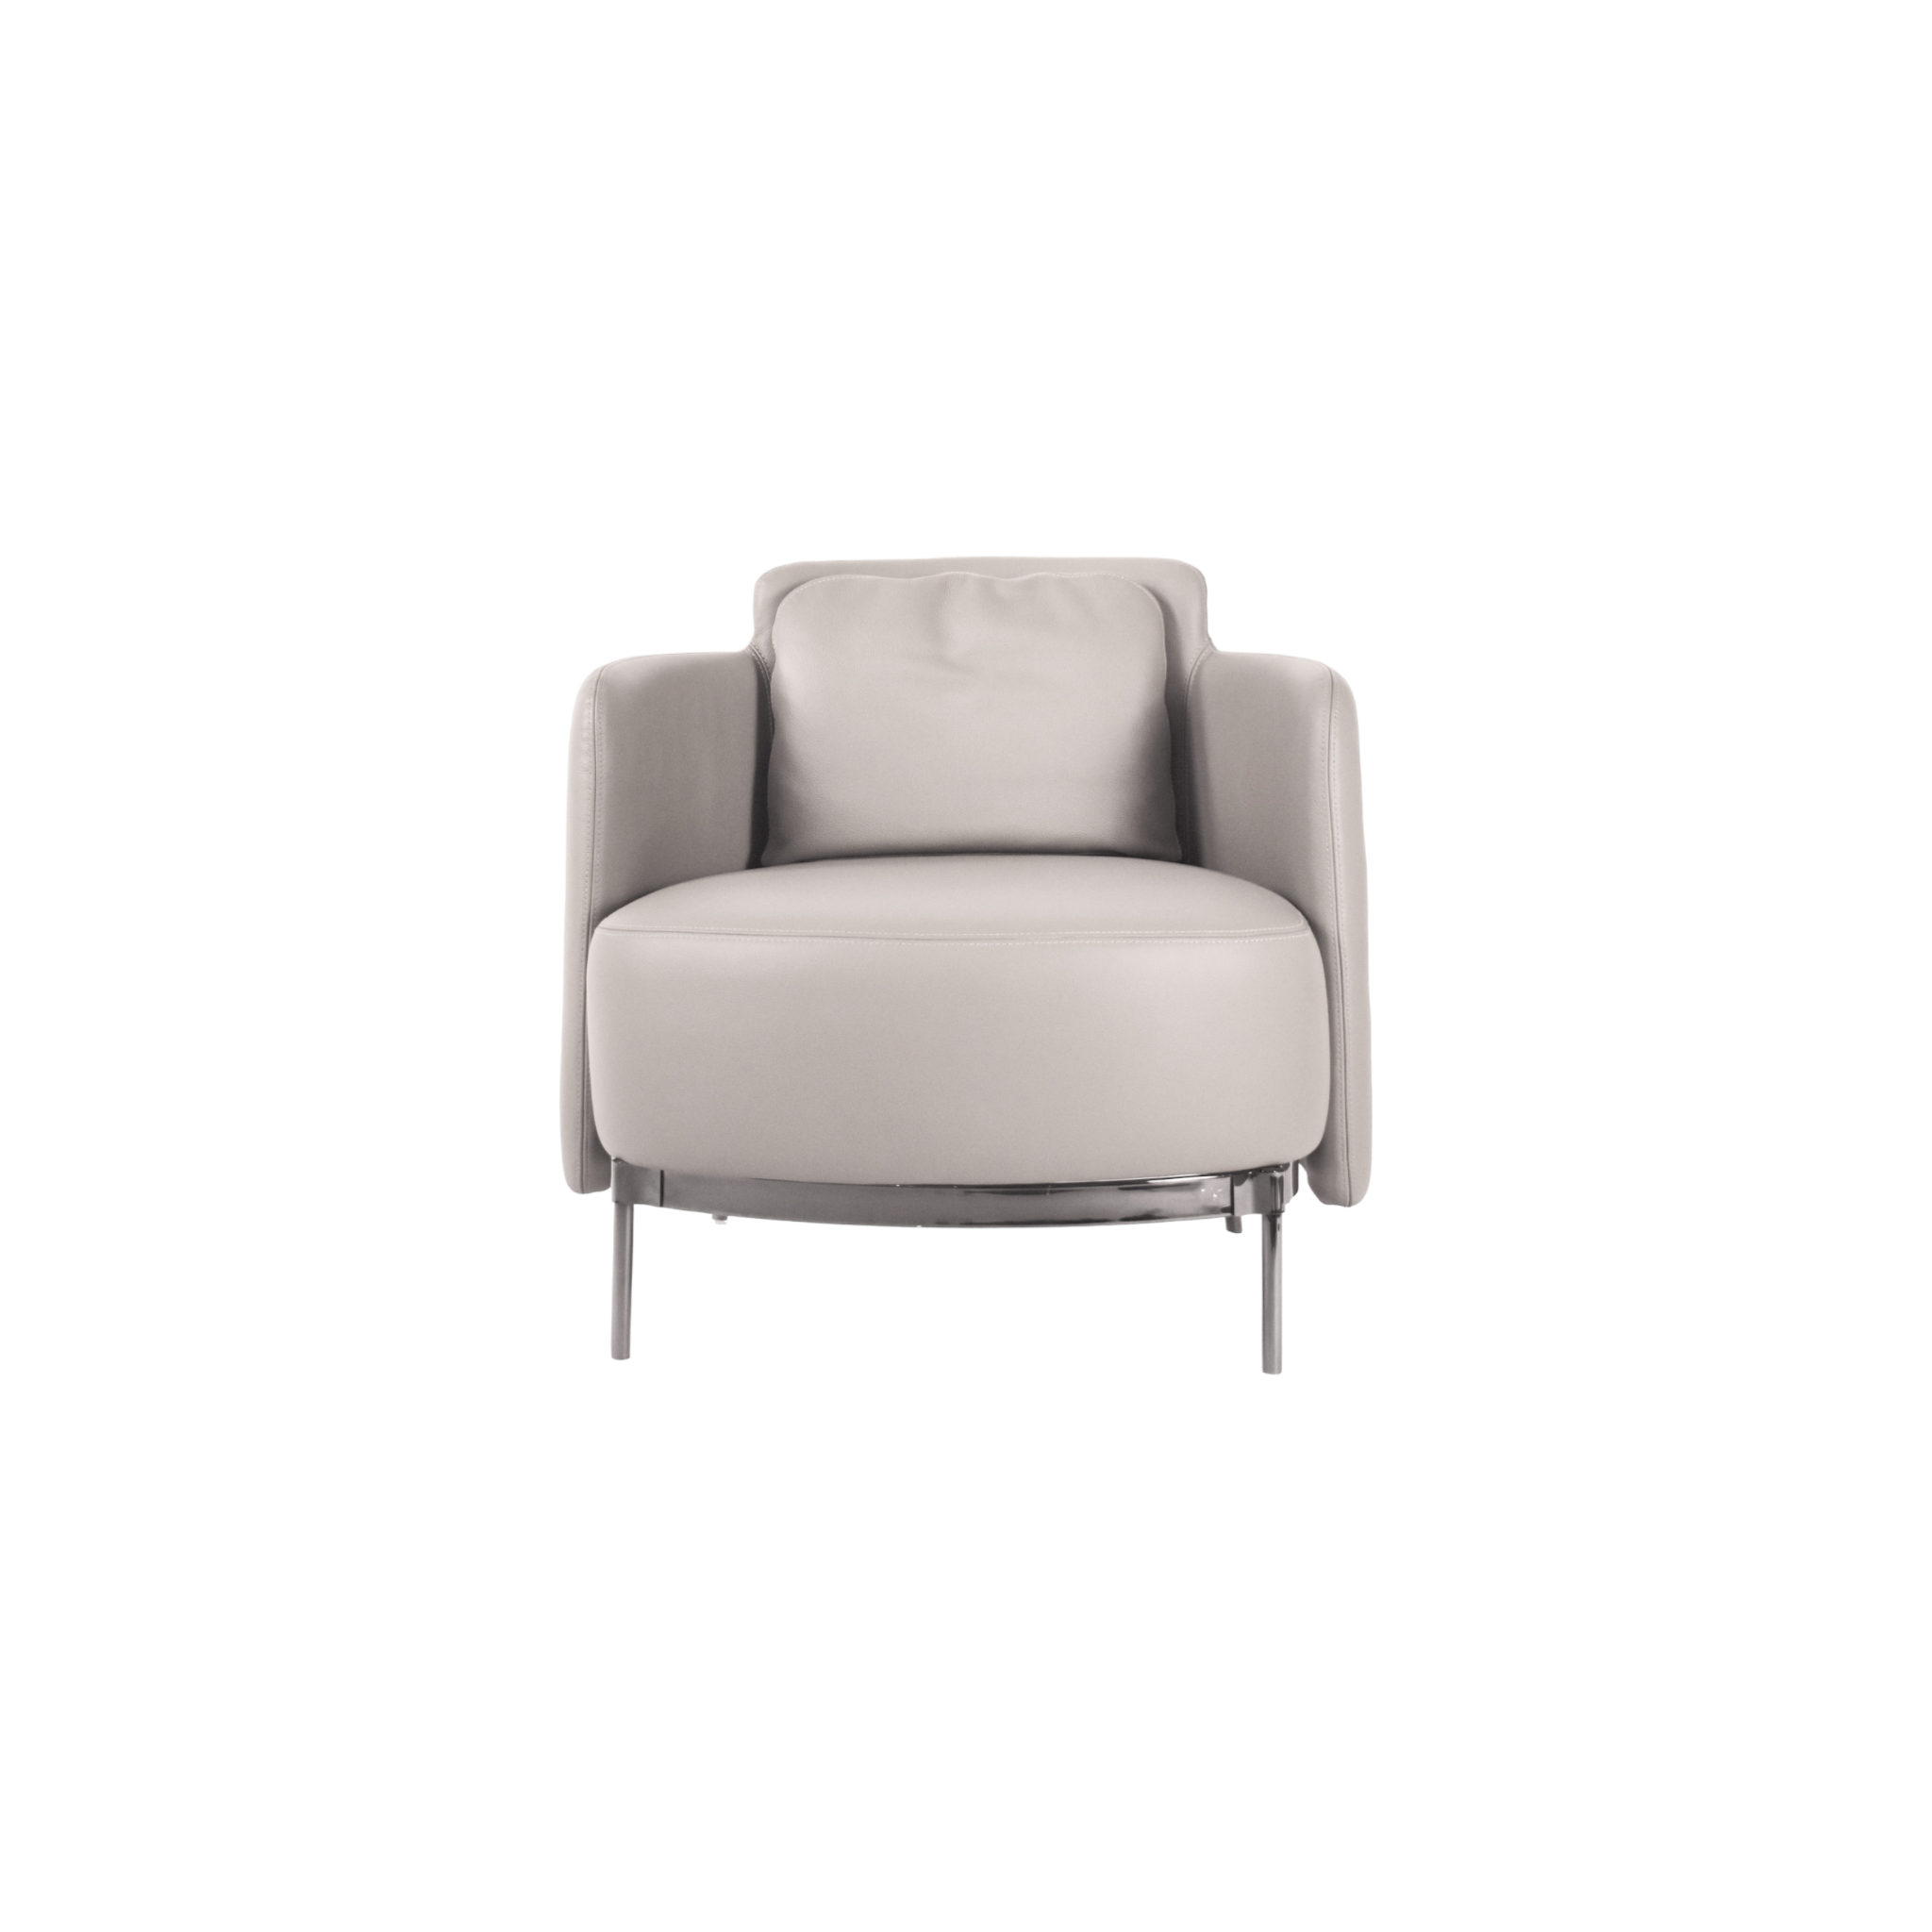 Darby Light Grey Lounge Chair